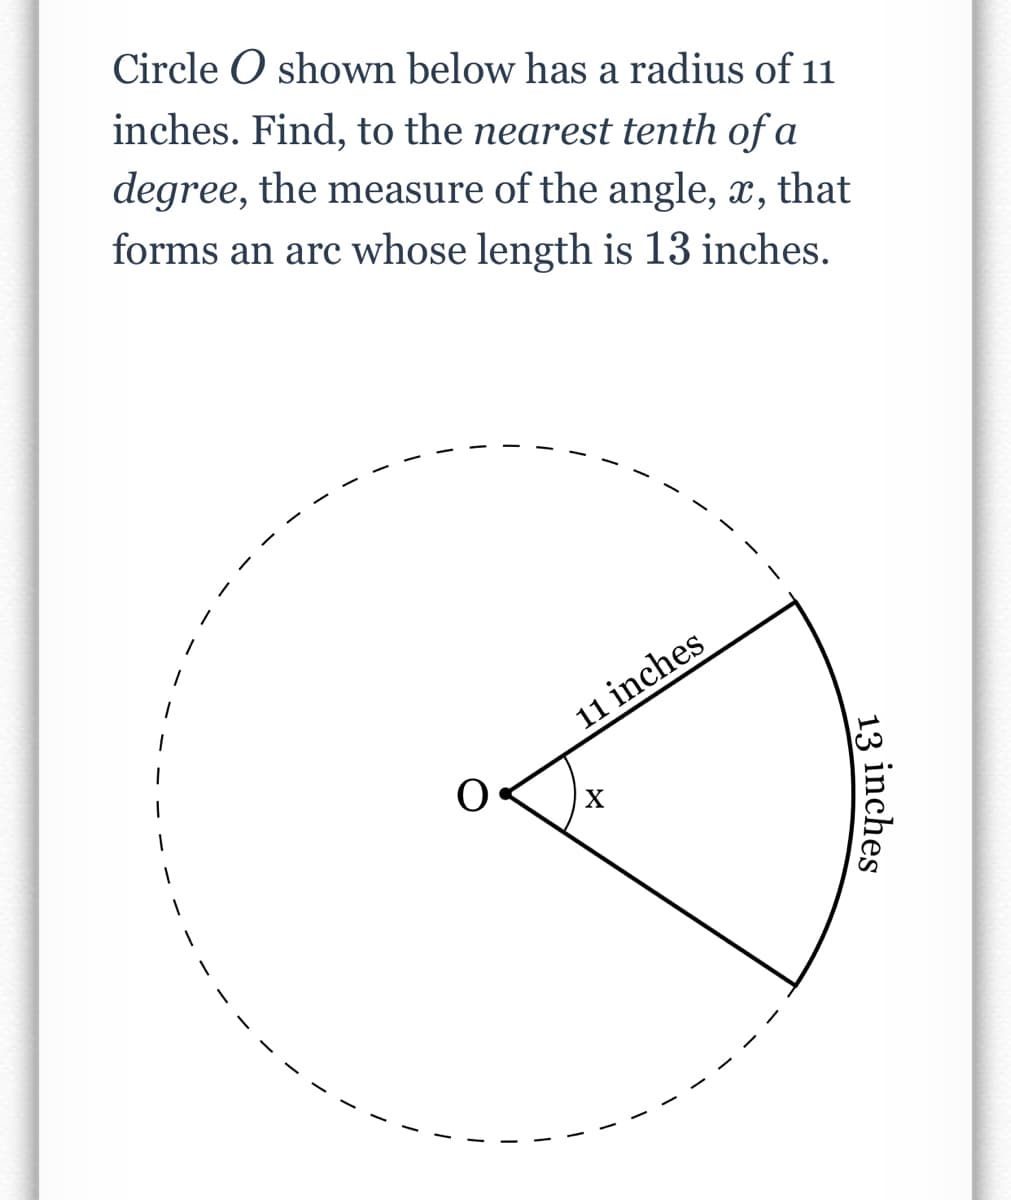 Circle O shown below has a radius of 11
inches. Find, to the nearest tenth of a
degree, the measure of the angle, x, that
forms an arc whose length is 13 inches.
11 inches
X
13 inches
